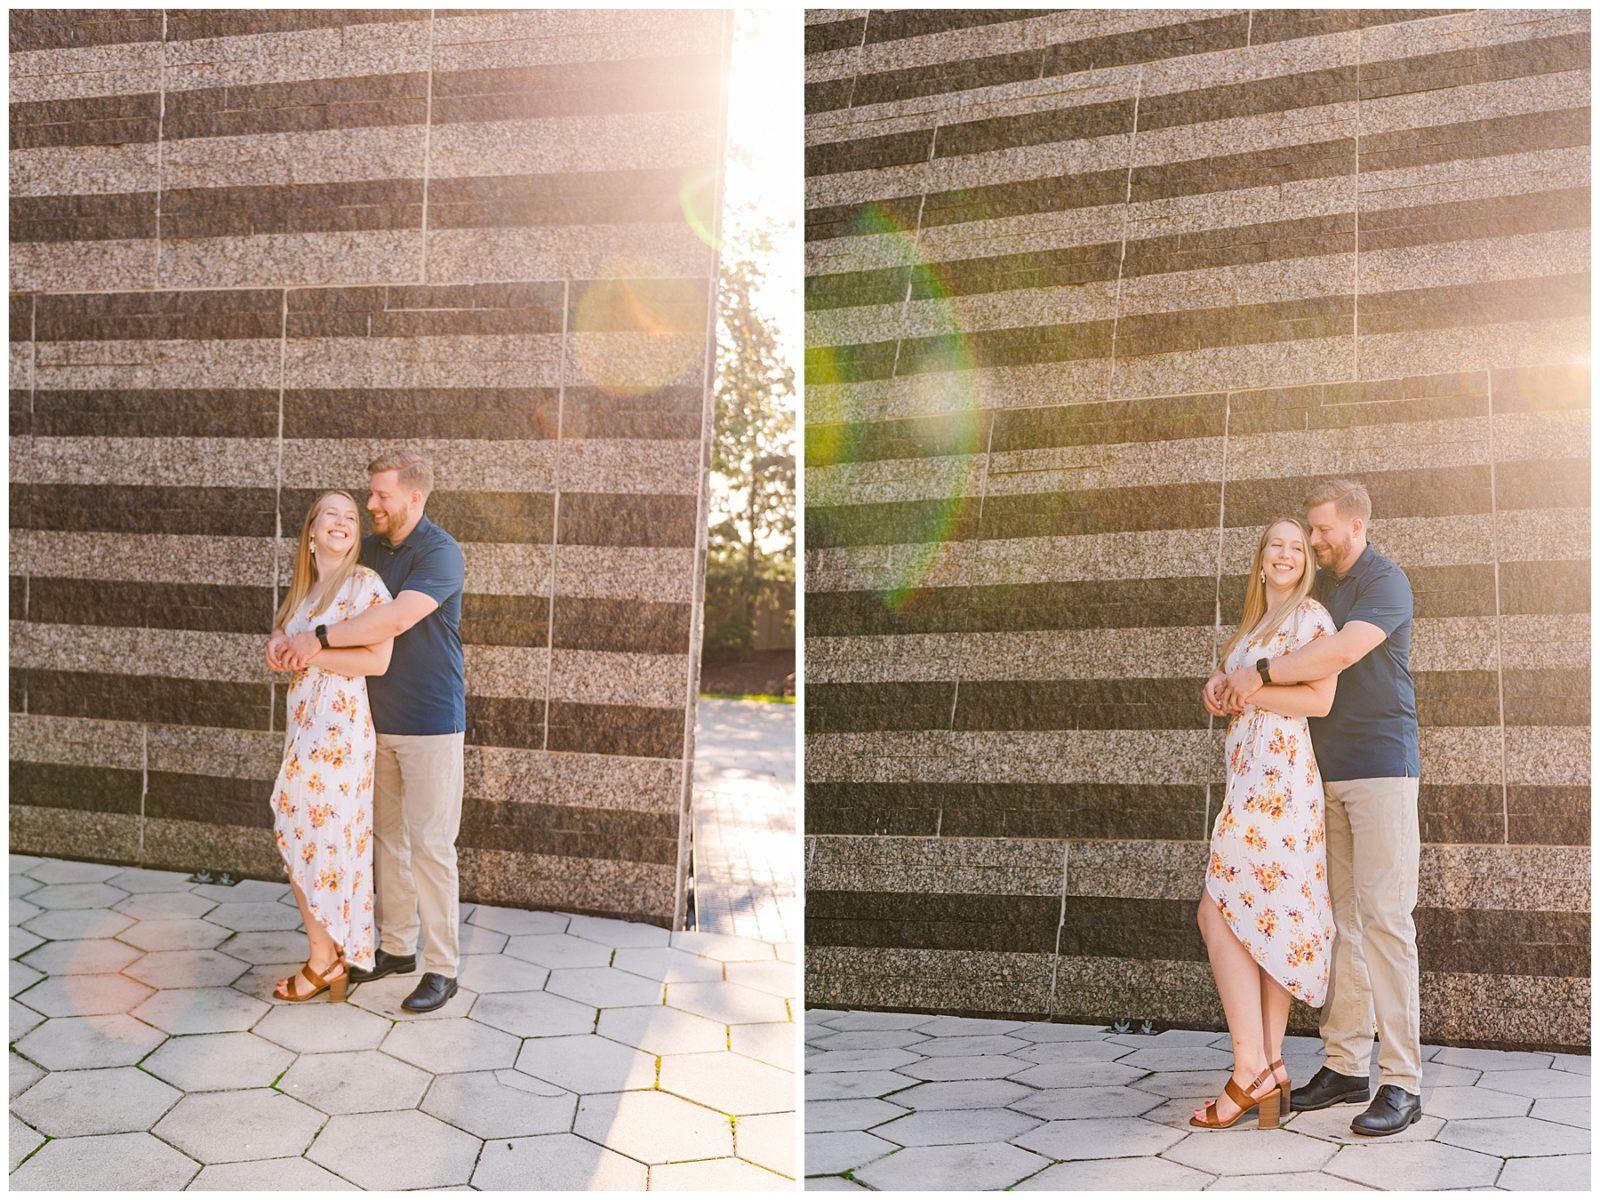 A Cleveland Museum of Art Engagement Session, architect design included in engagement session, wade lagoon, summer engagement session